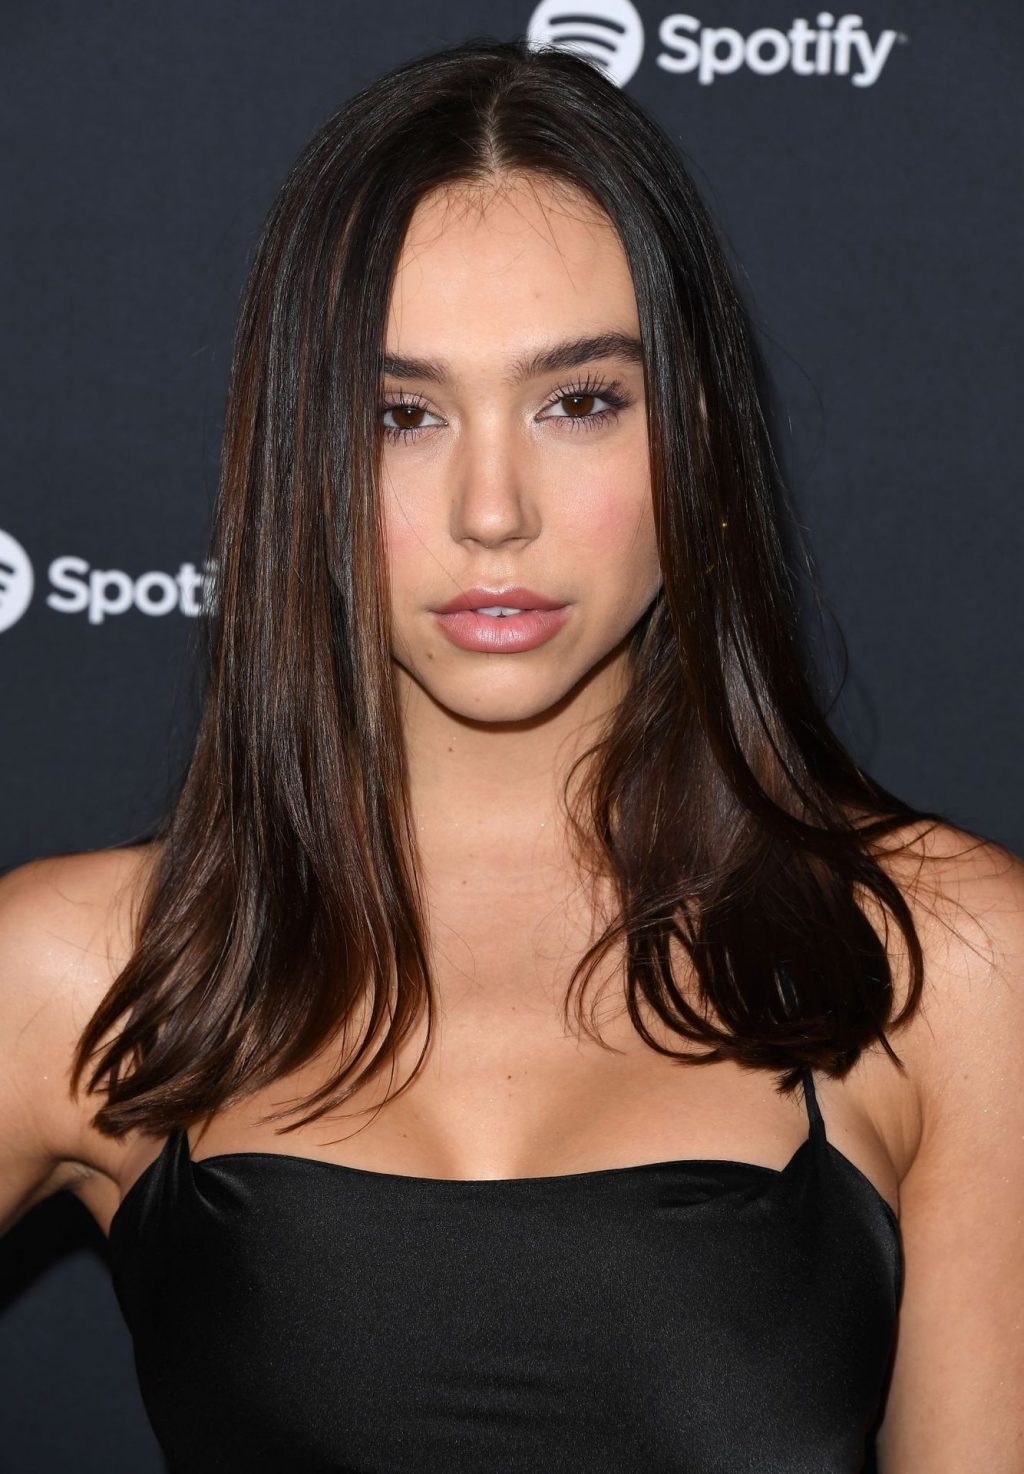 Alexis Ren Nude Photos and Videos | #TheFappening